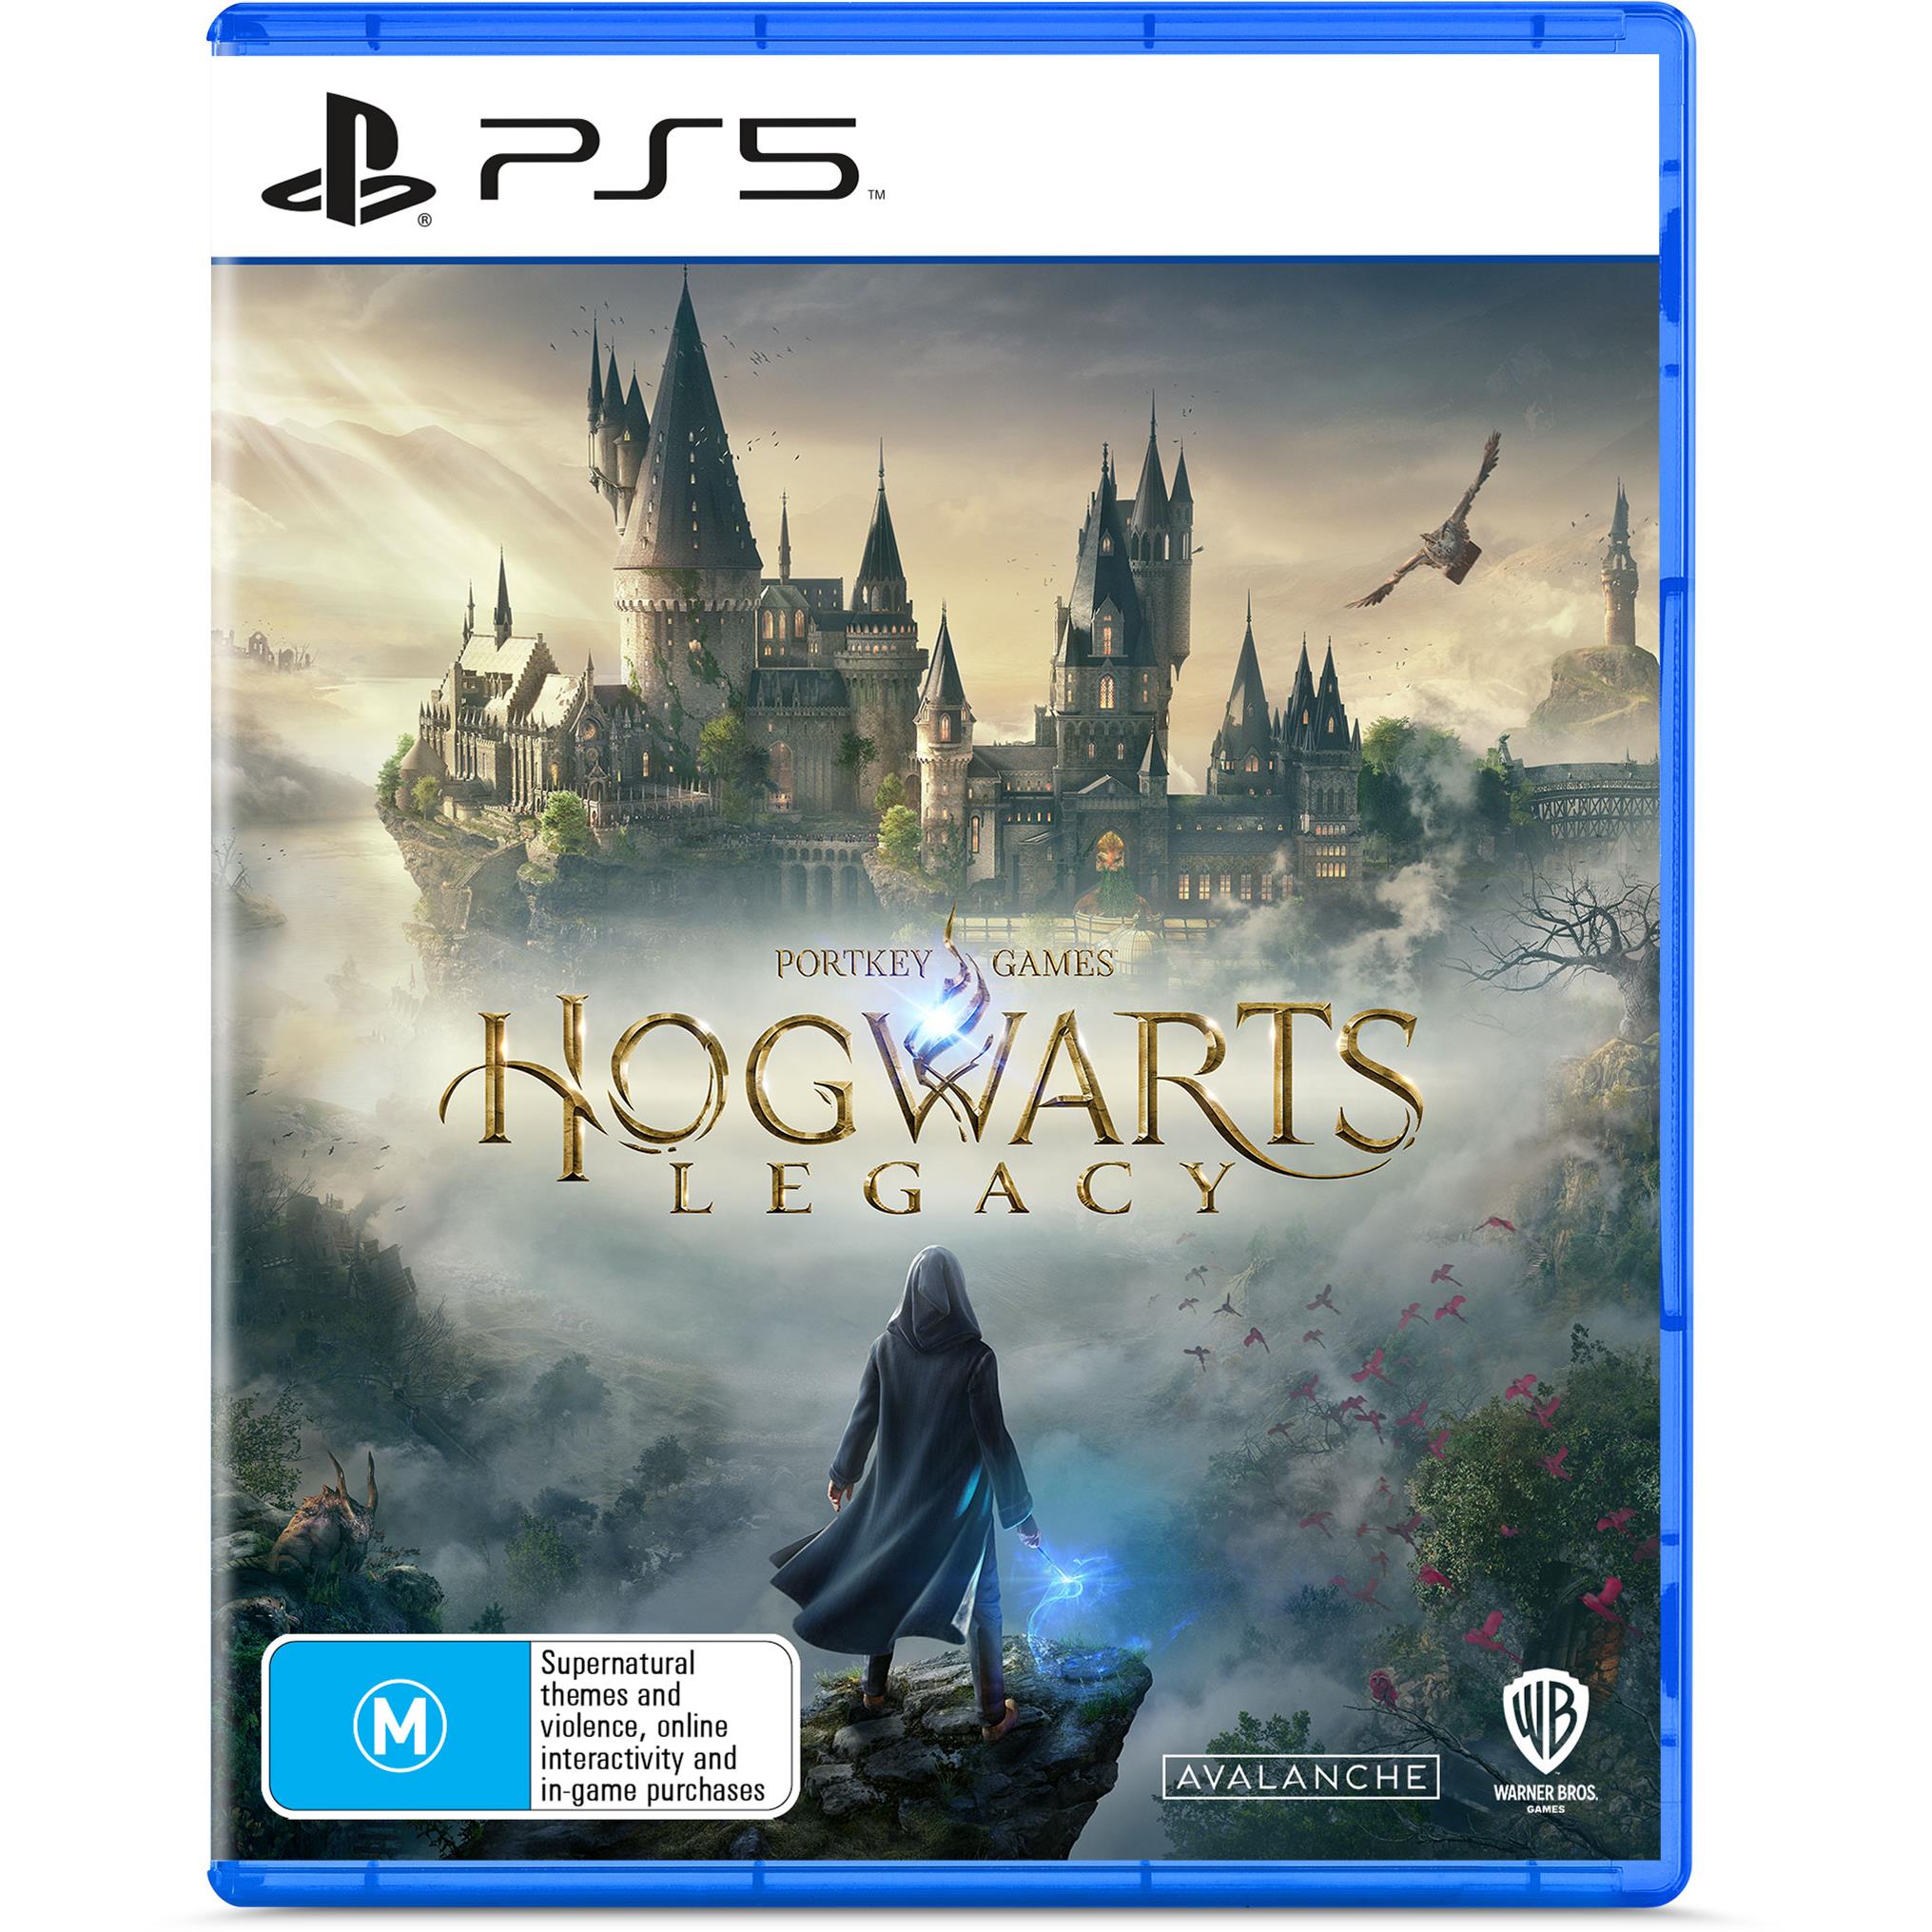 Harry Potter PlayStation PS3 Games - Choose Your Game - Complete